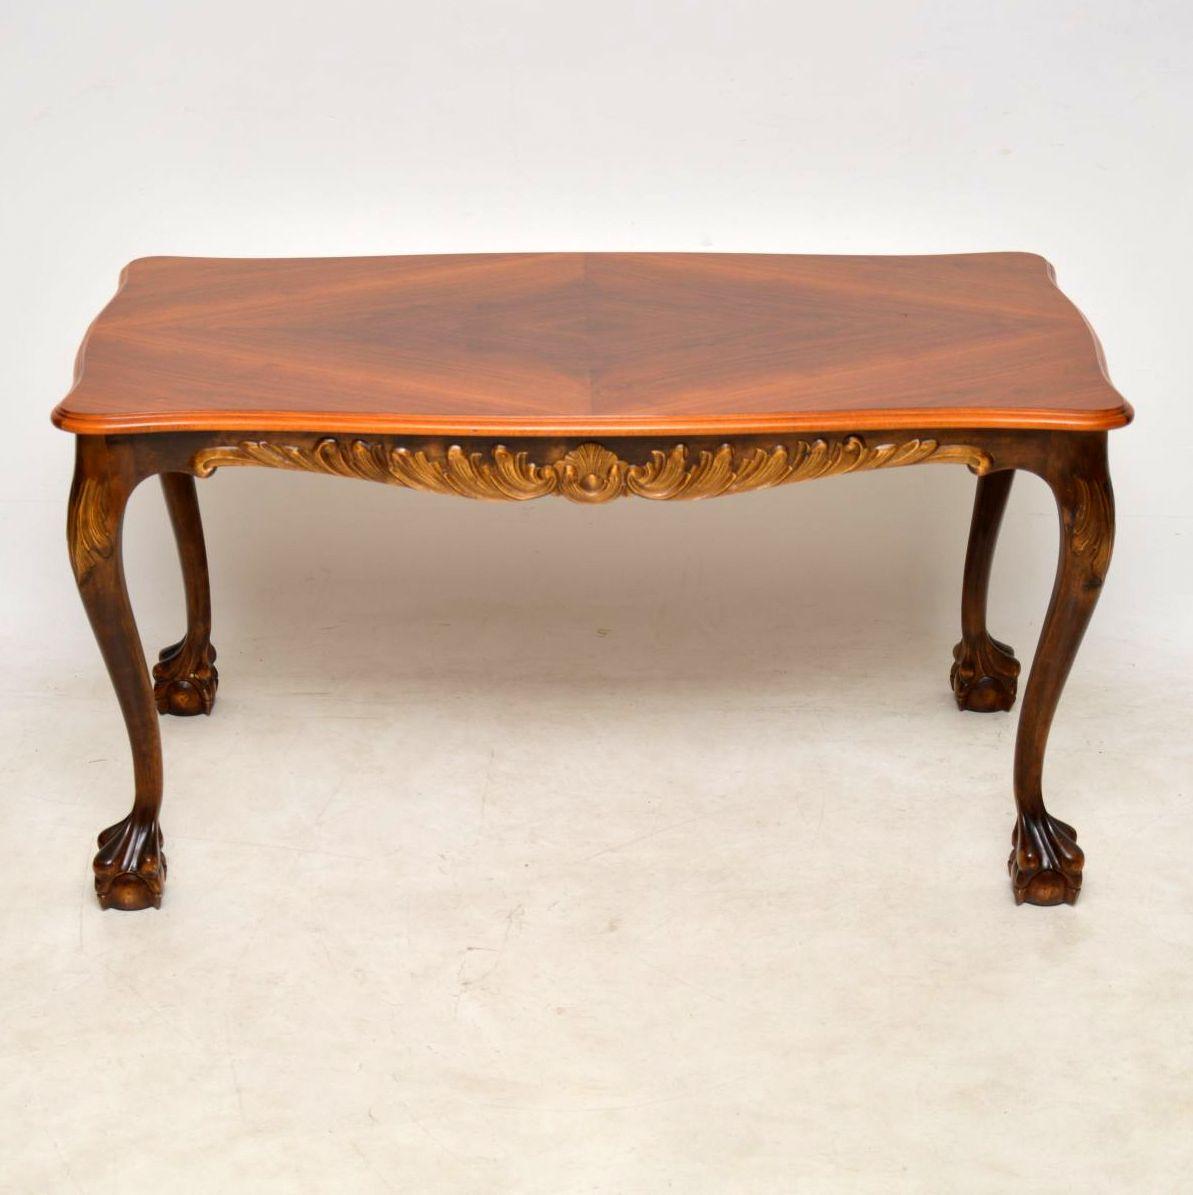 Large Antique Swedish satin birch coffee table with more height than usual & in great condition. I would date this table to around the 1920’s period. Like all antique Swedish furniture, it’s very high quality & has some lovely figuring in the satin